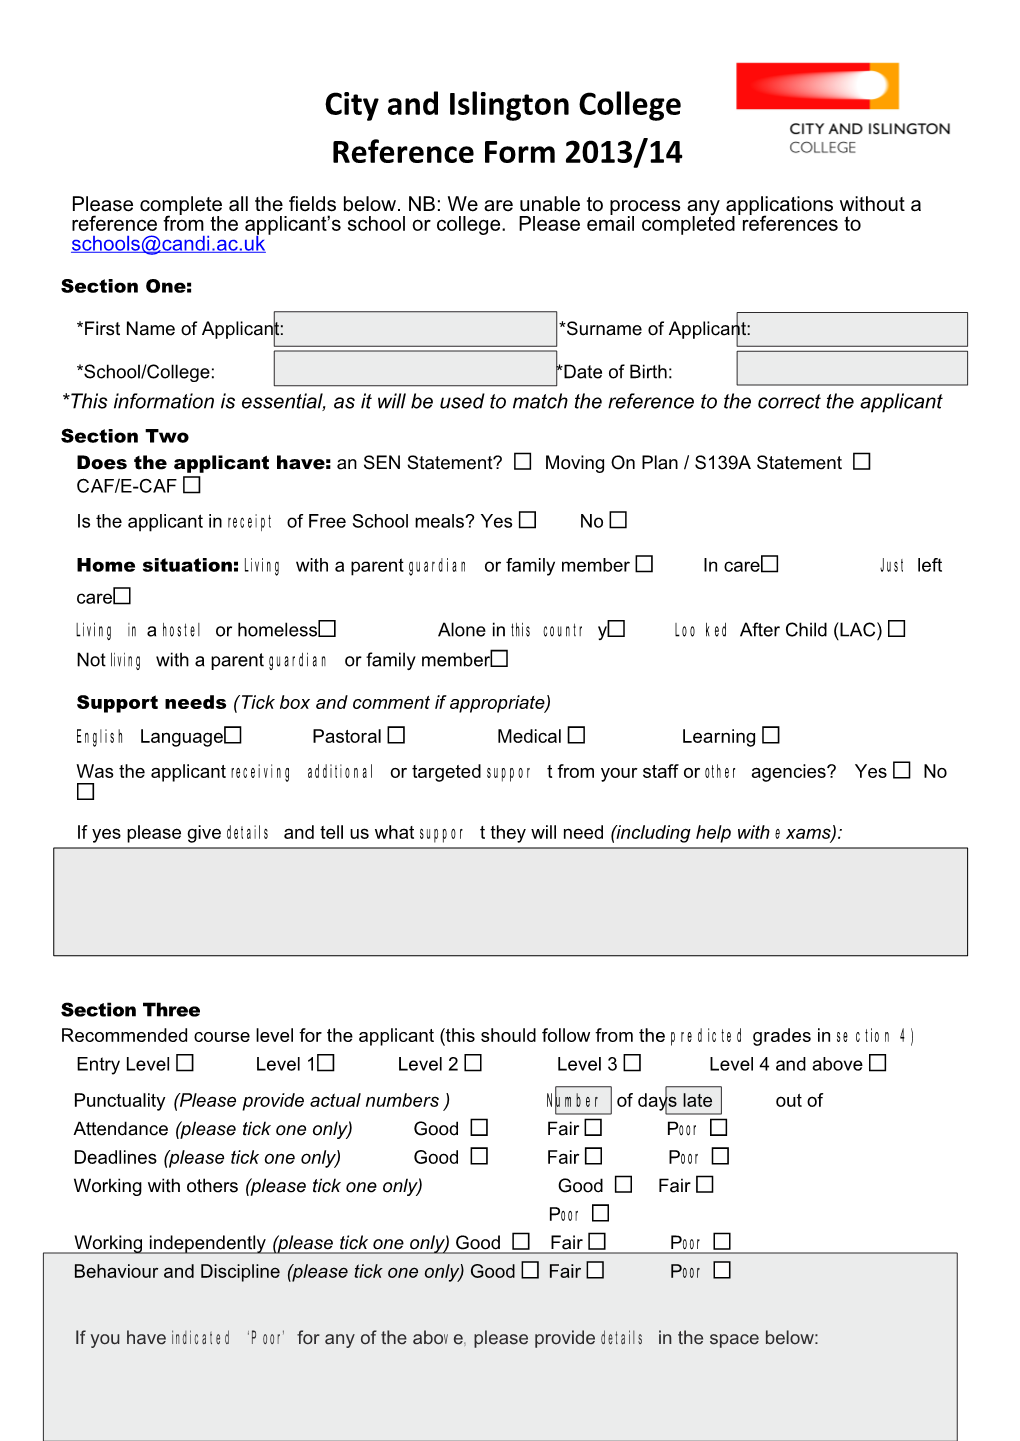 City and Islington College Reference Form 2013/14